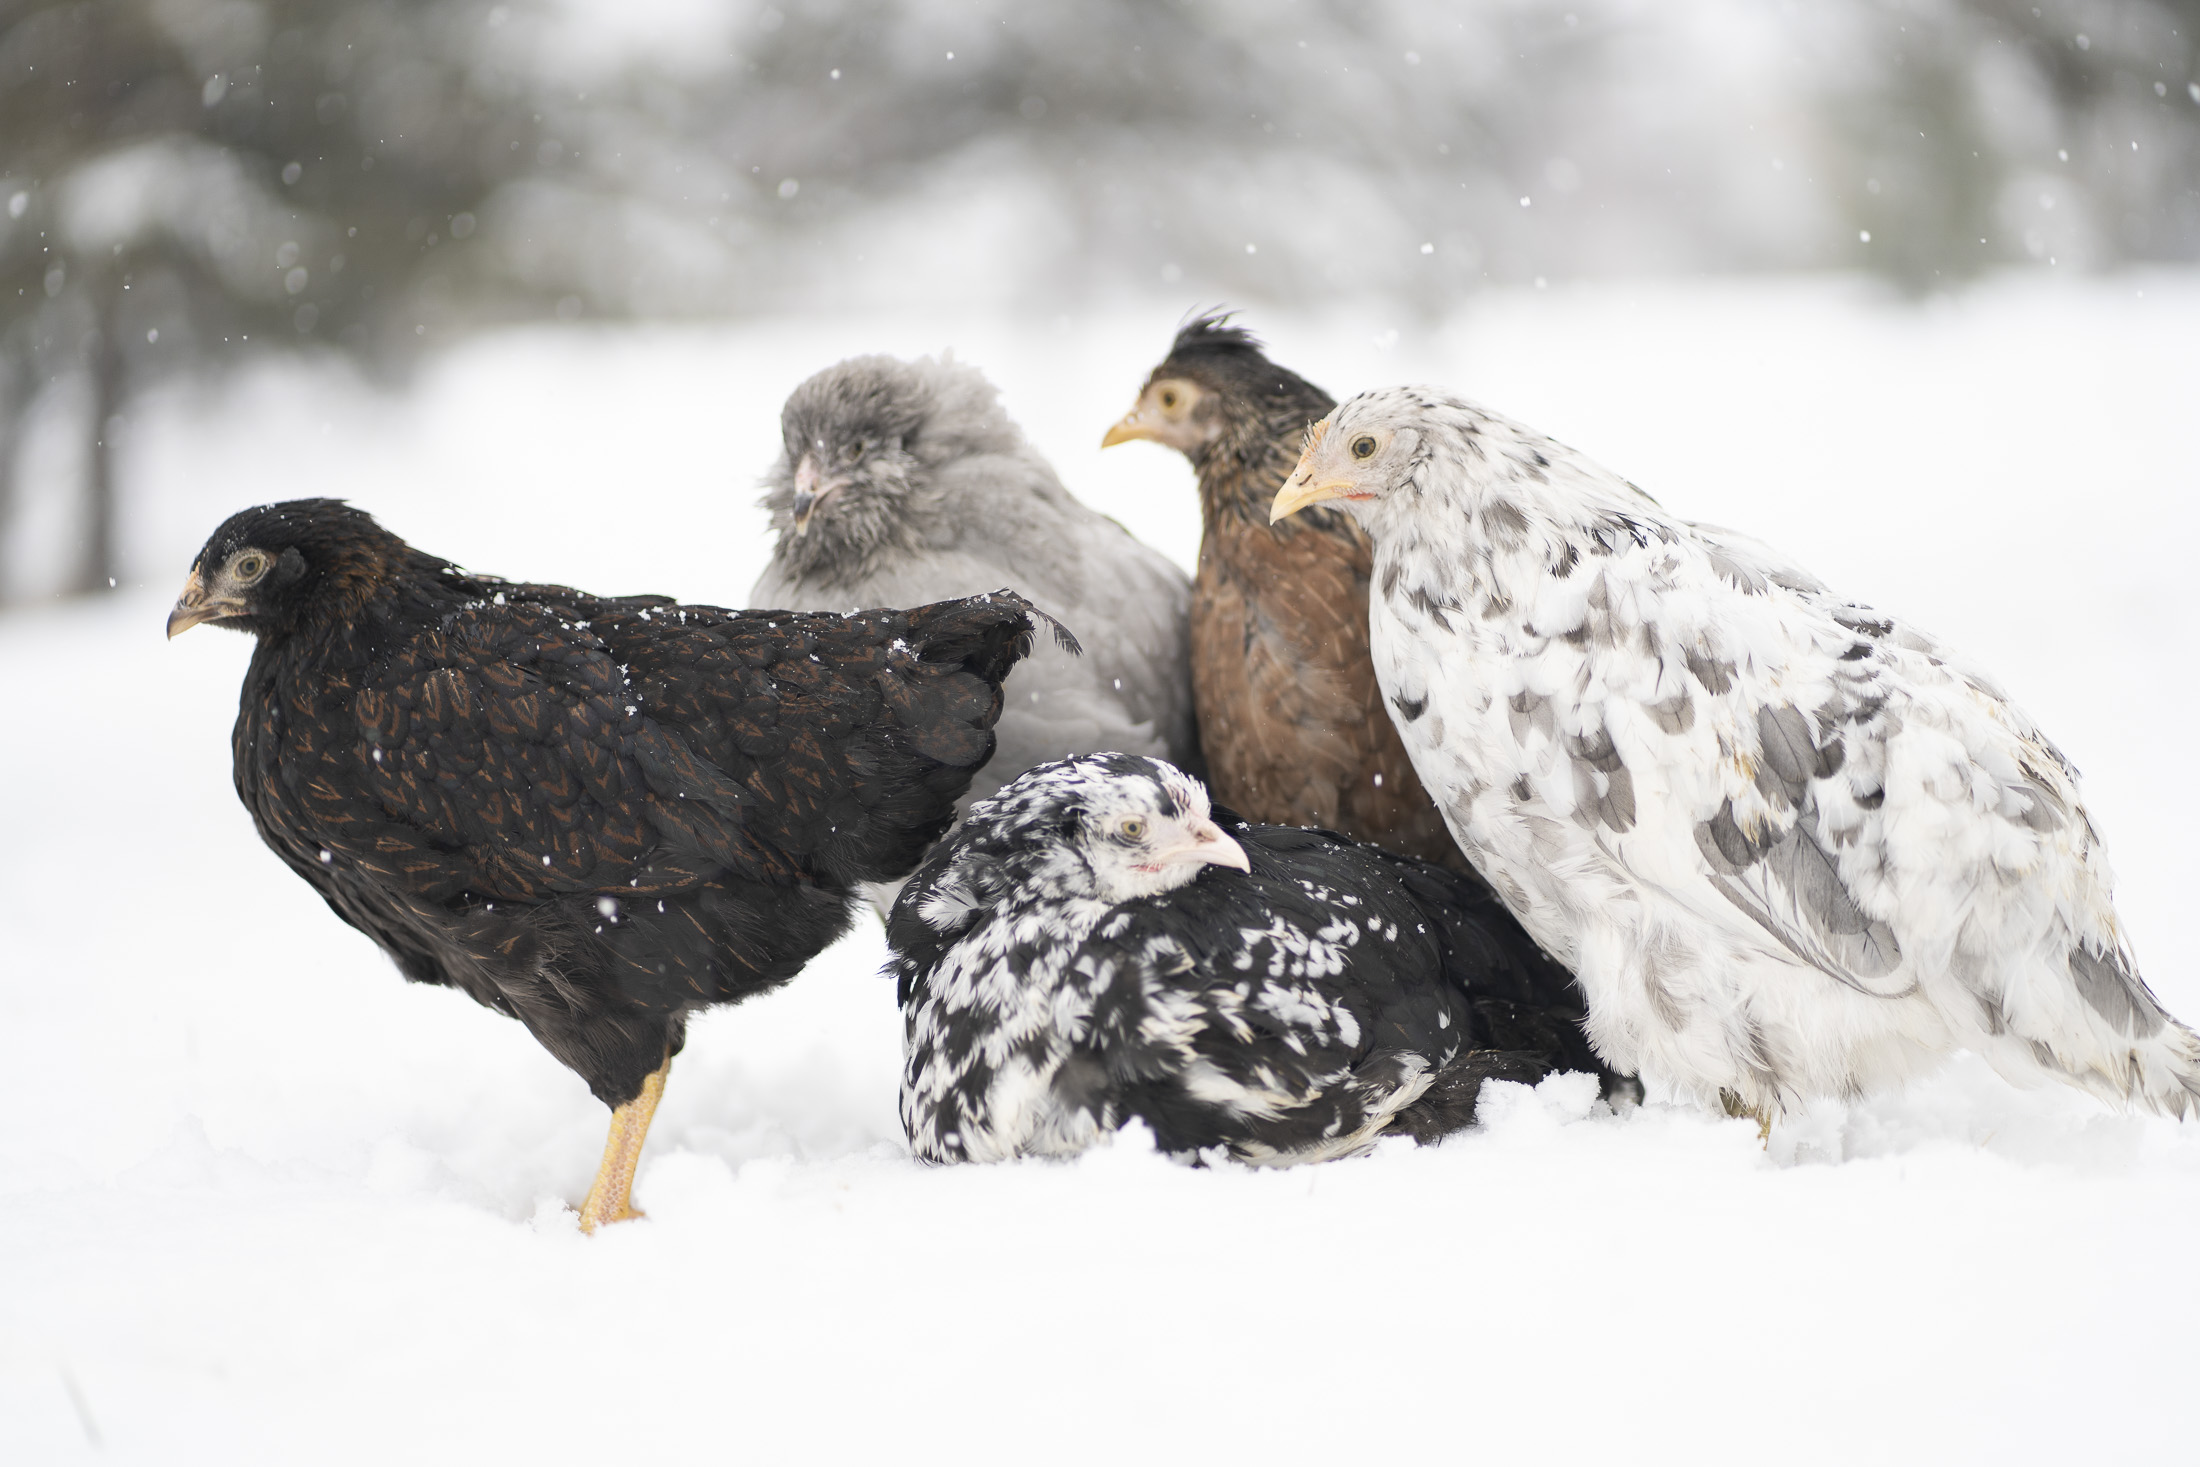 How To Keep Chickens Warm in Winter - Chickens In The Six